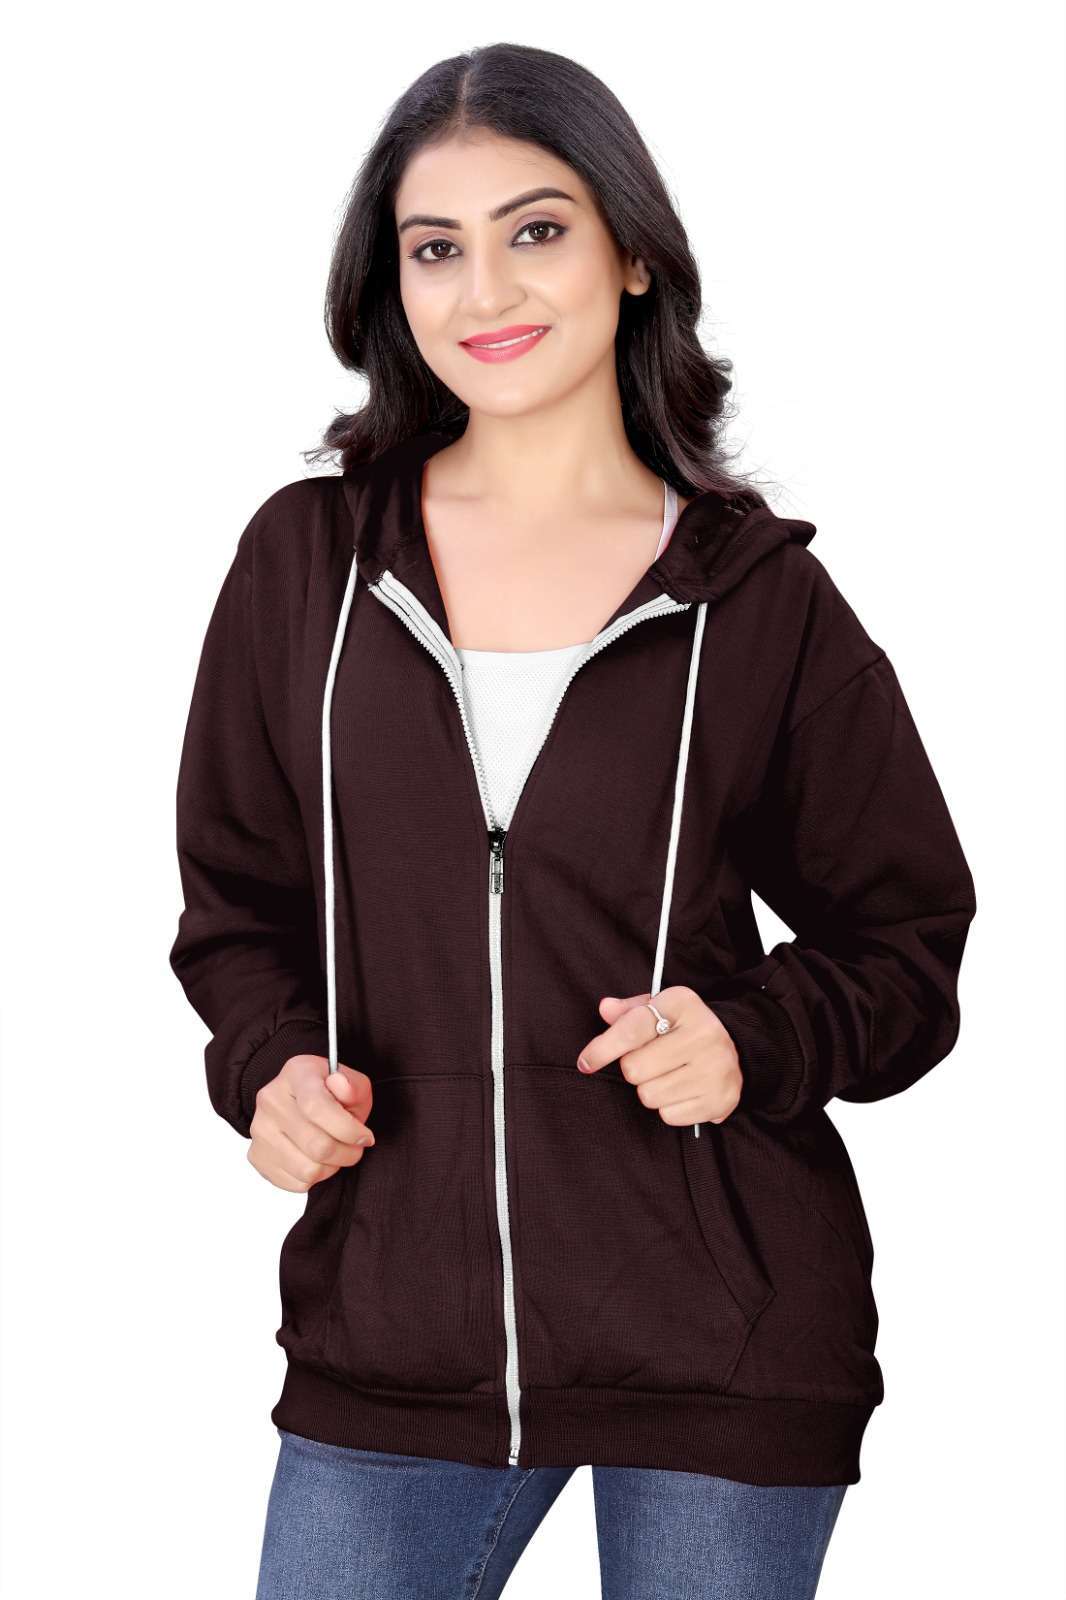 Wholesale Hoodies for Printing & Personal Wear | ShirtSpace